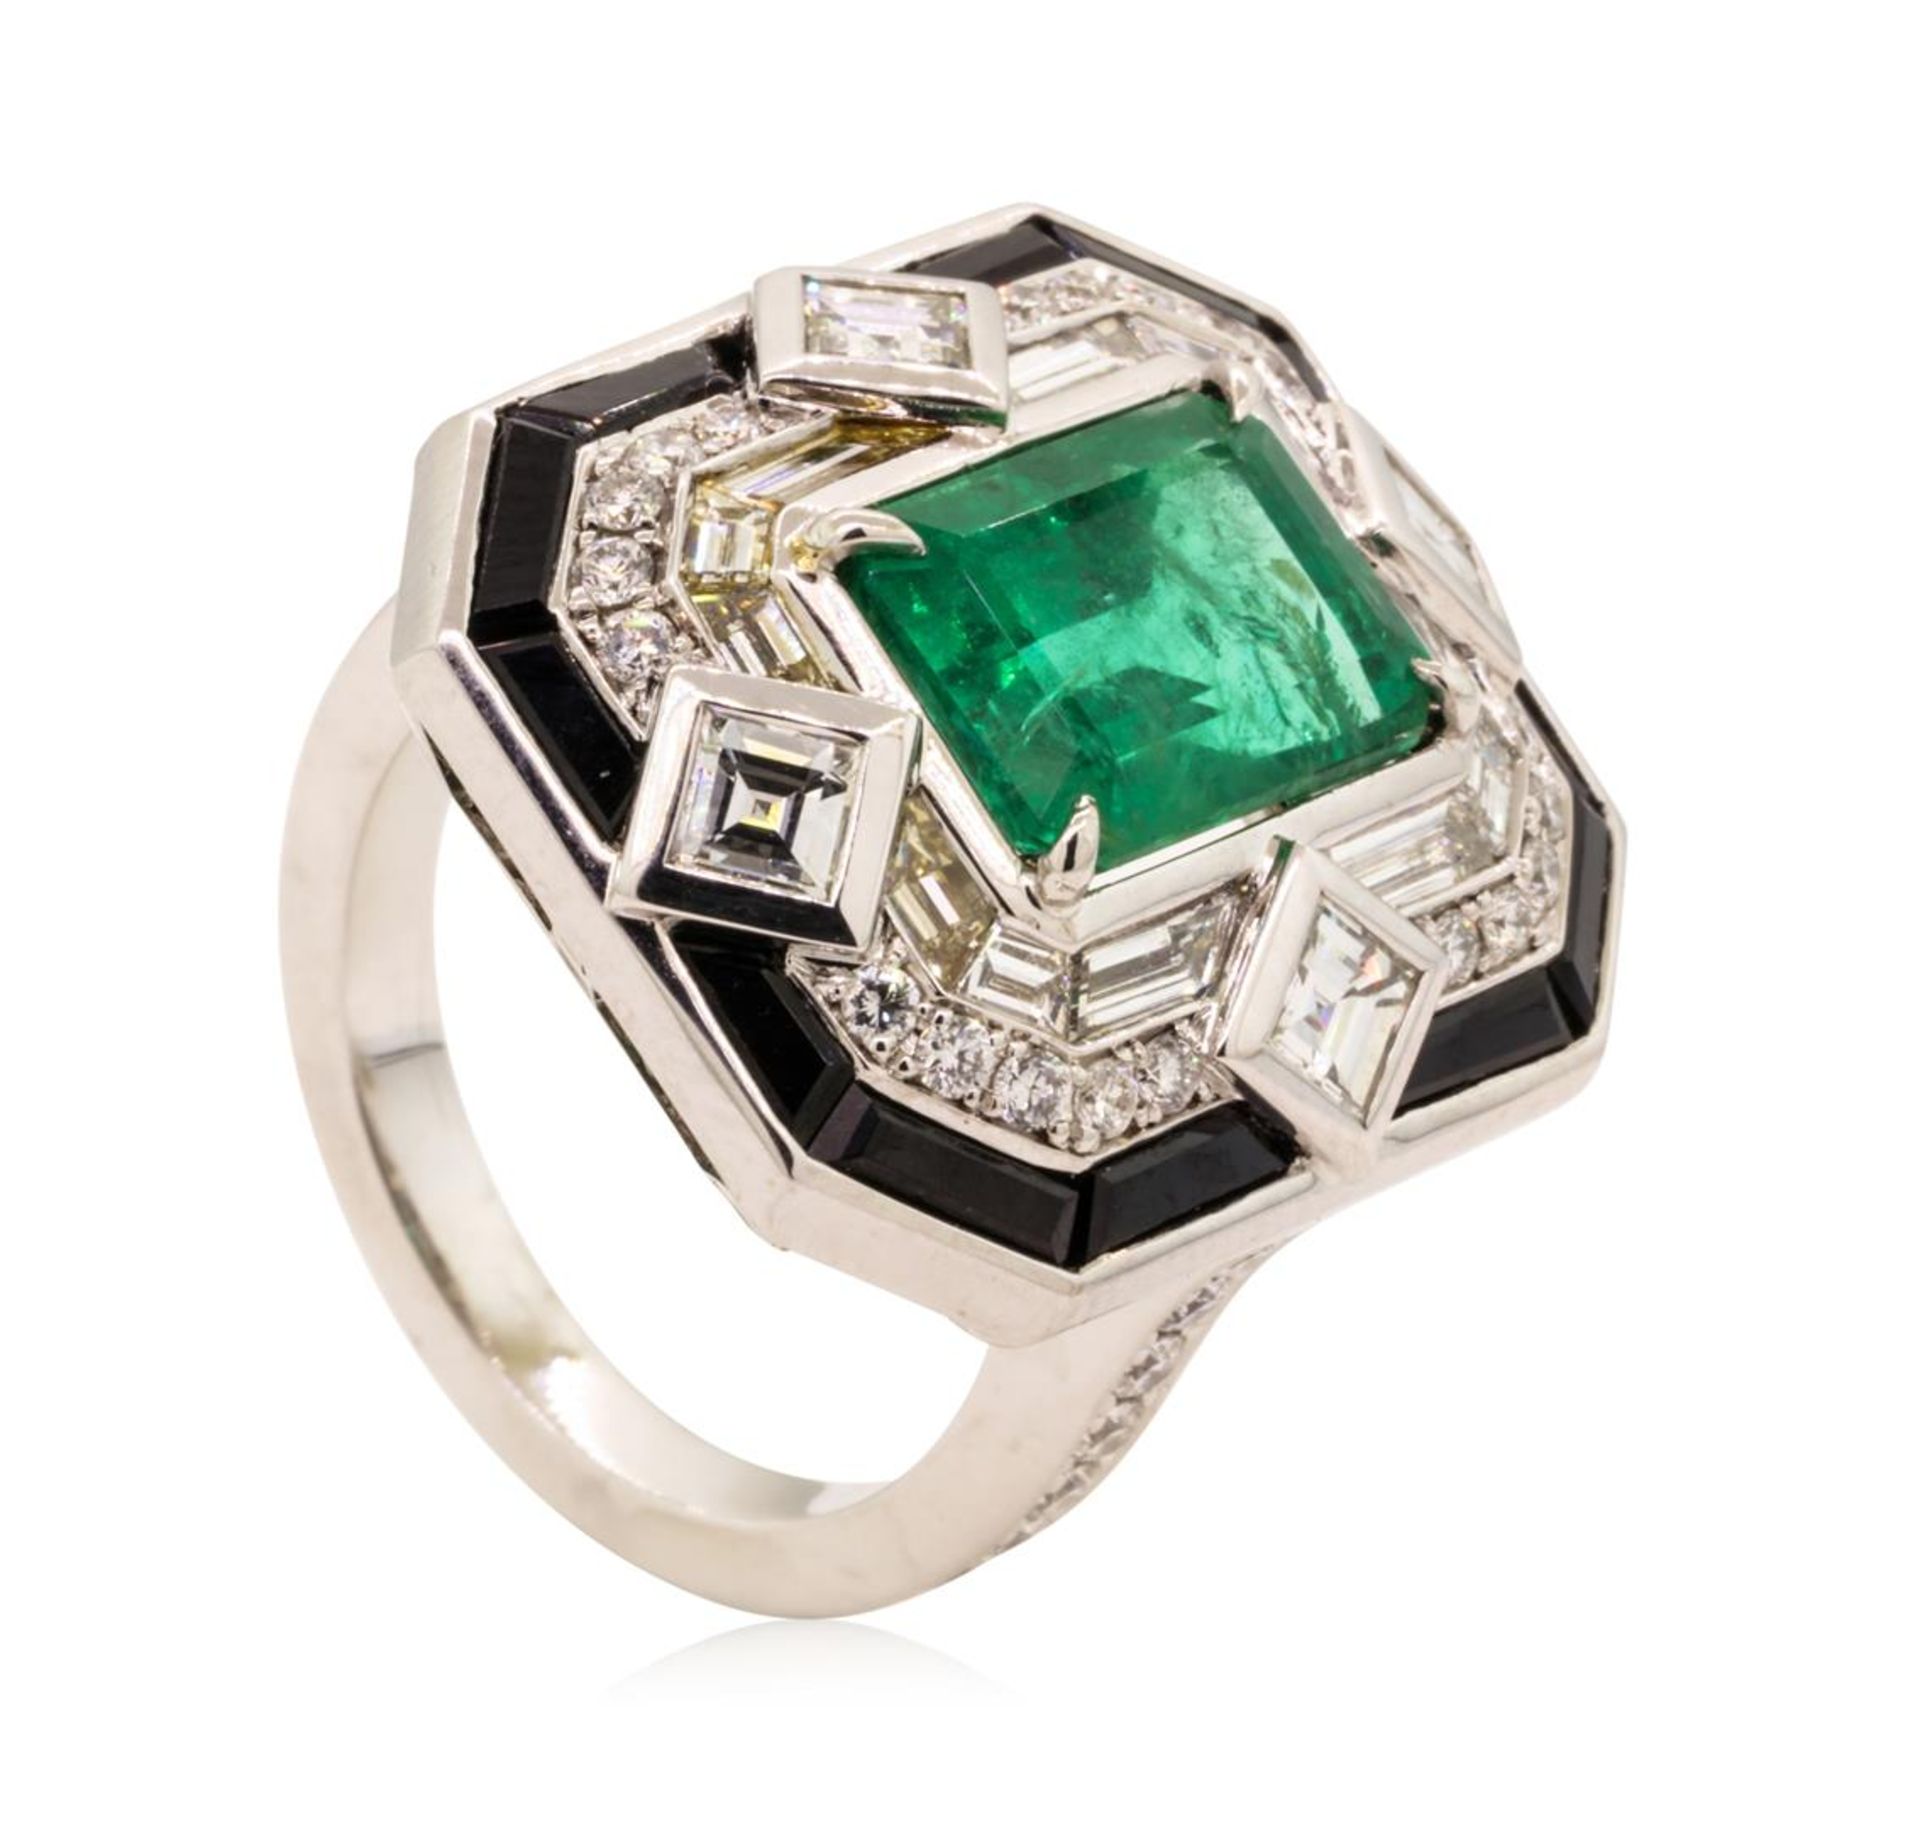 6.46 ctw Emerald and Diamond Ring - 18KT White Gold - Image 4 of 6